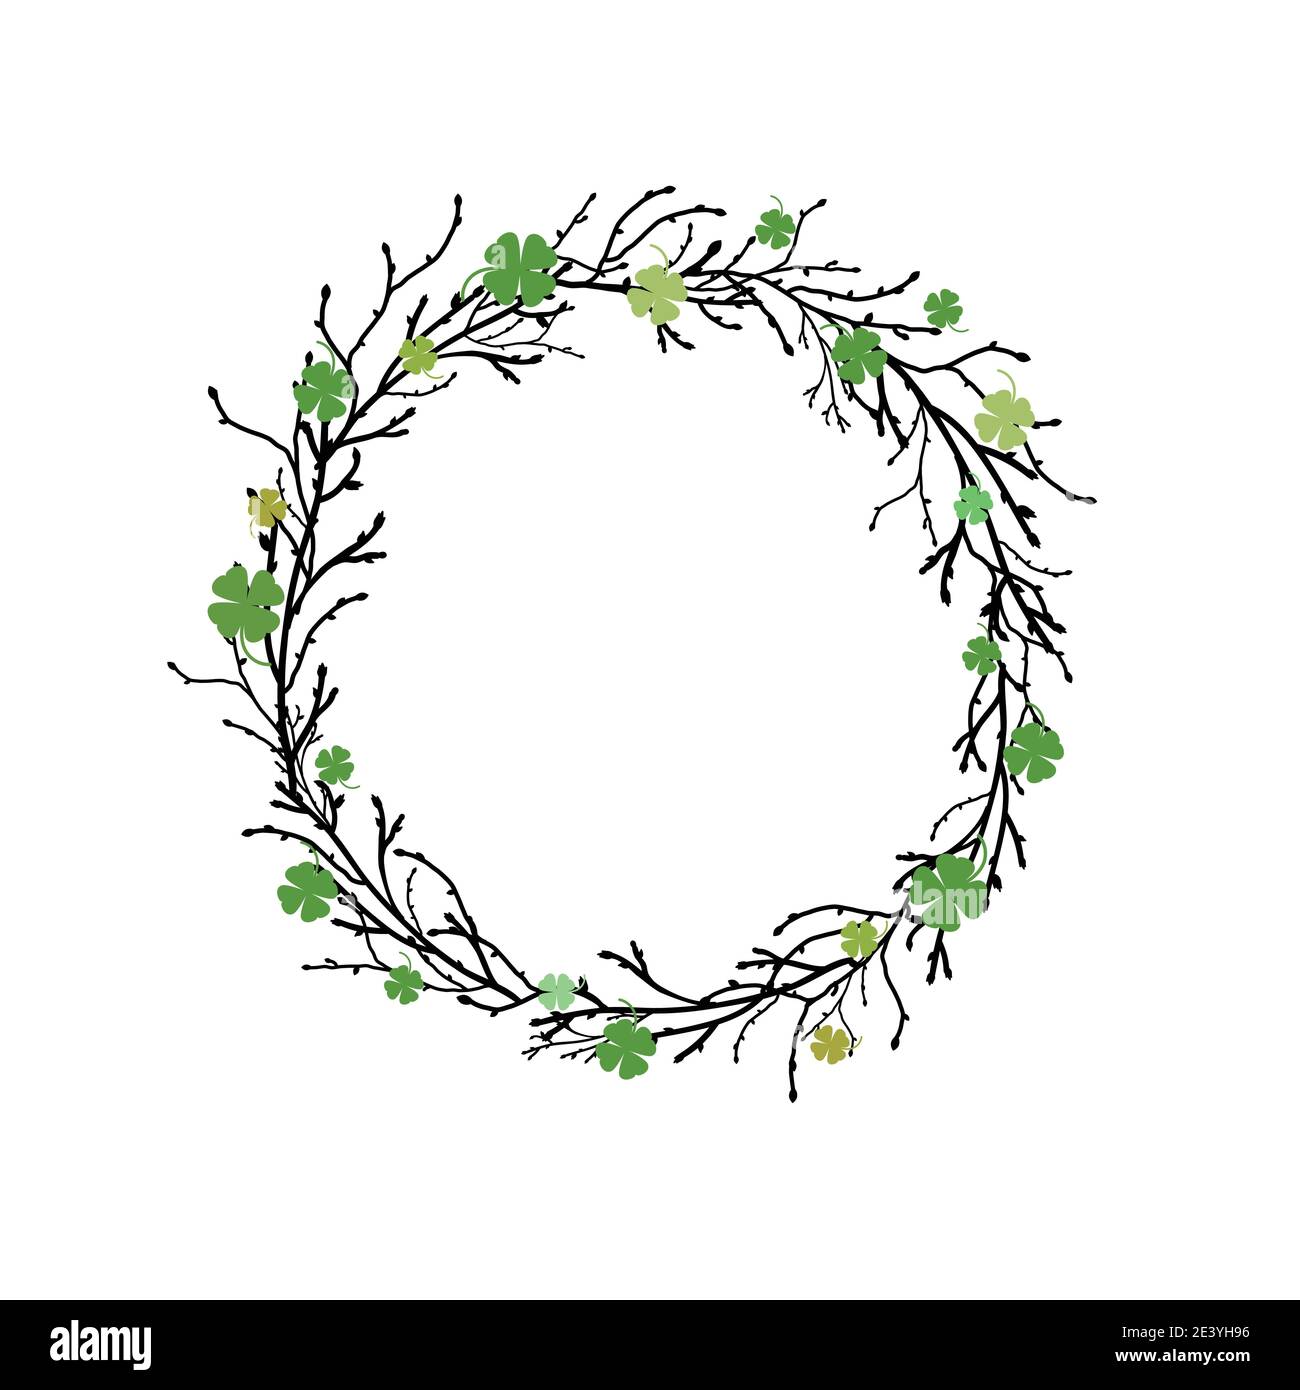 Clover garland with wreath from black branches and twigs on white background. St Patrick day greeting card with shamrock wreath. Irish. Vector illustr Stock Vector